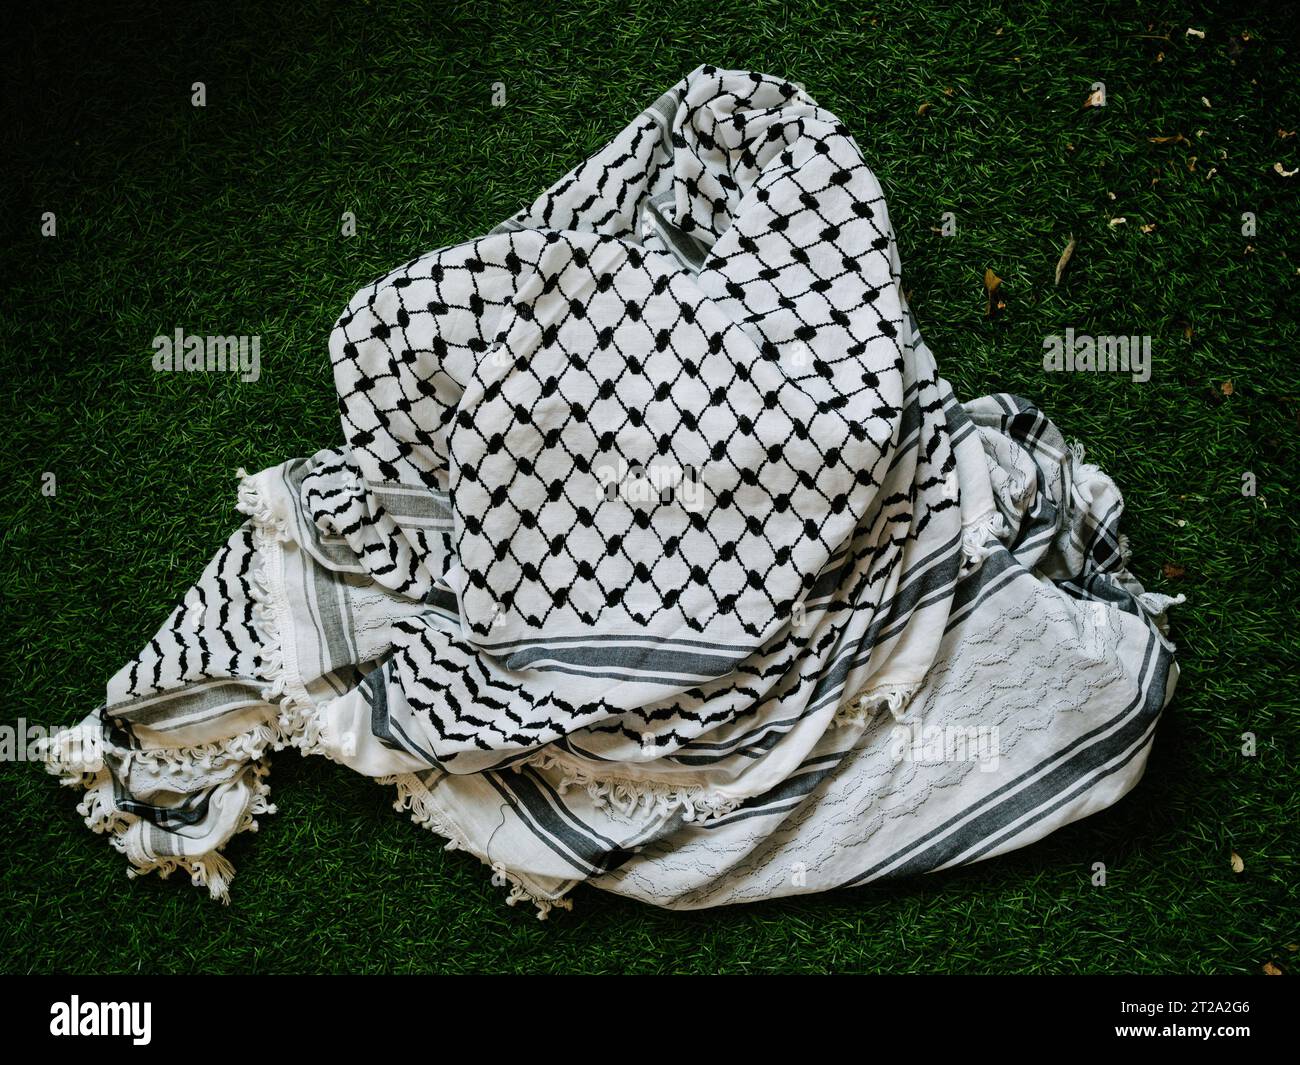 How the Palestinian keffiyeh became a symbol of resistance